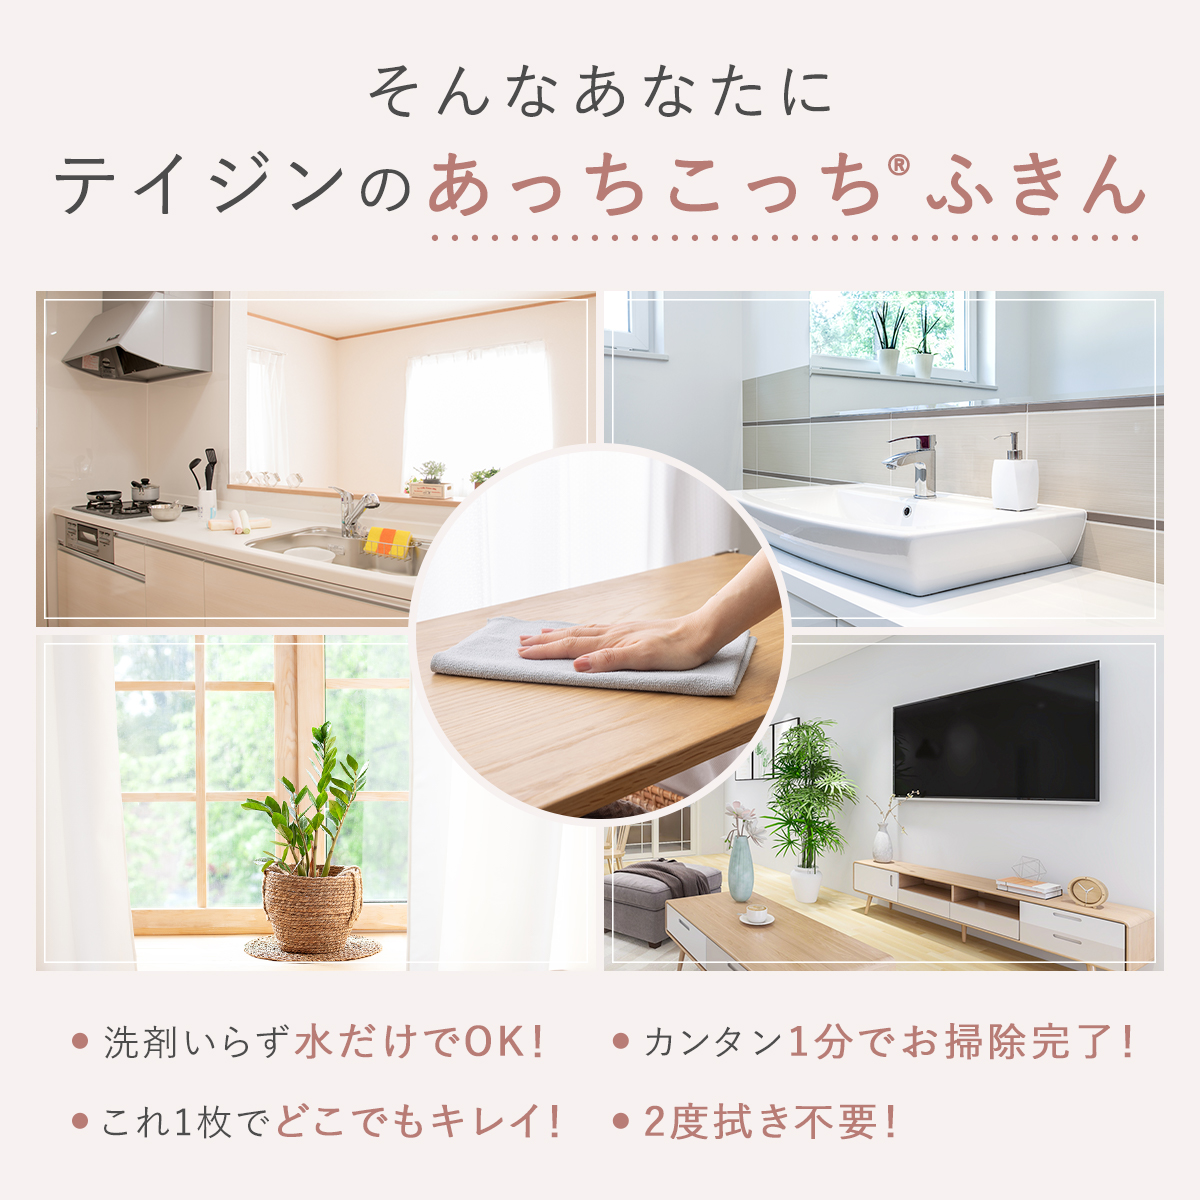 M size [ thin version ]1 sheets [TEIJIN]...... dish cloth (33cm × 22cm) made in Japan free shipping microfibre . water speed ... taking . detergent ... kitchen faucet mirror window 